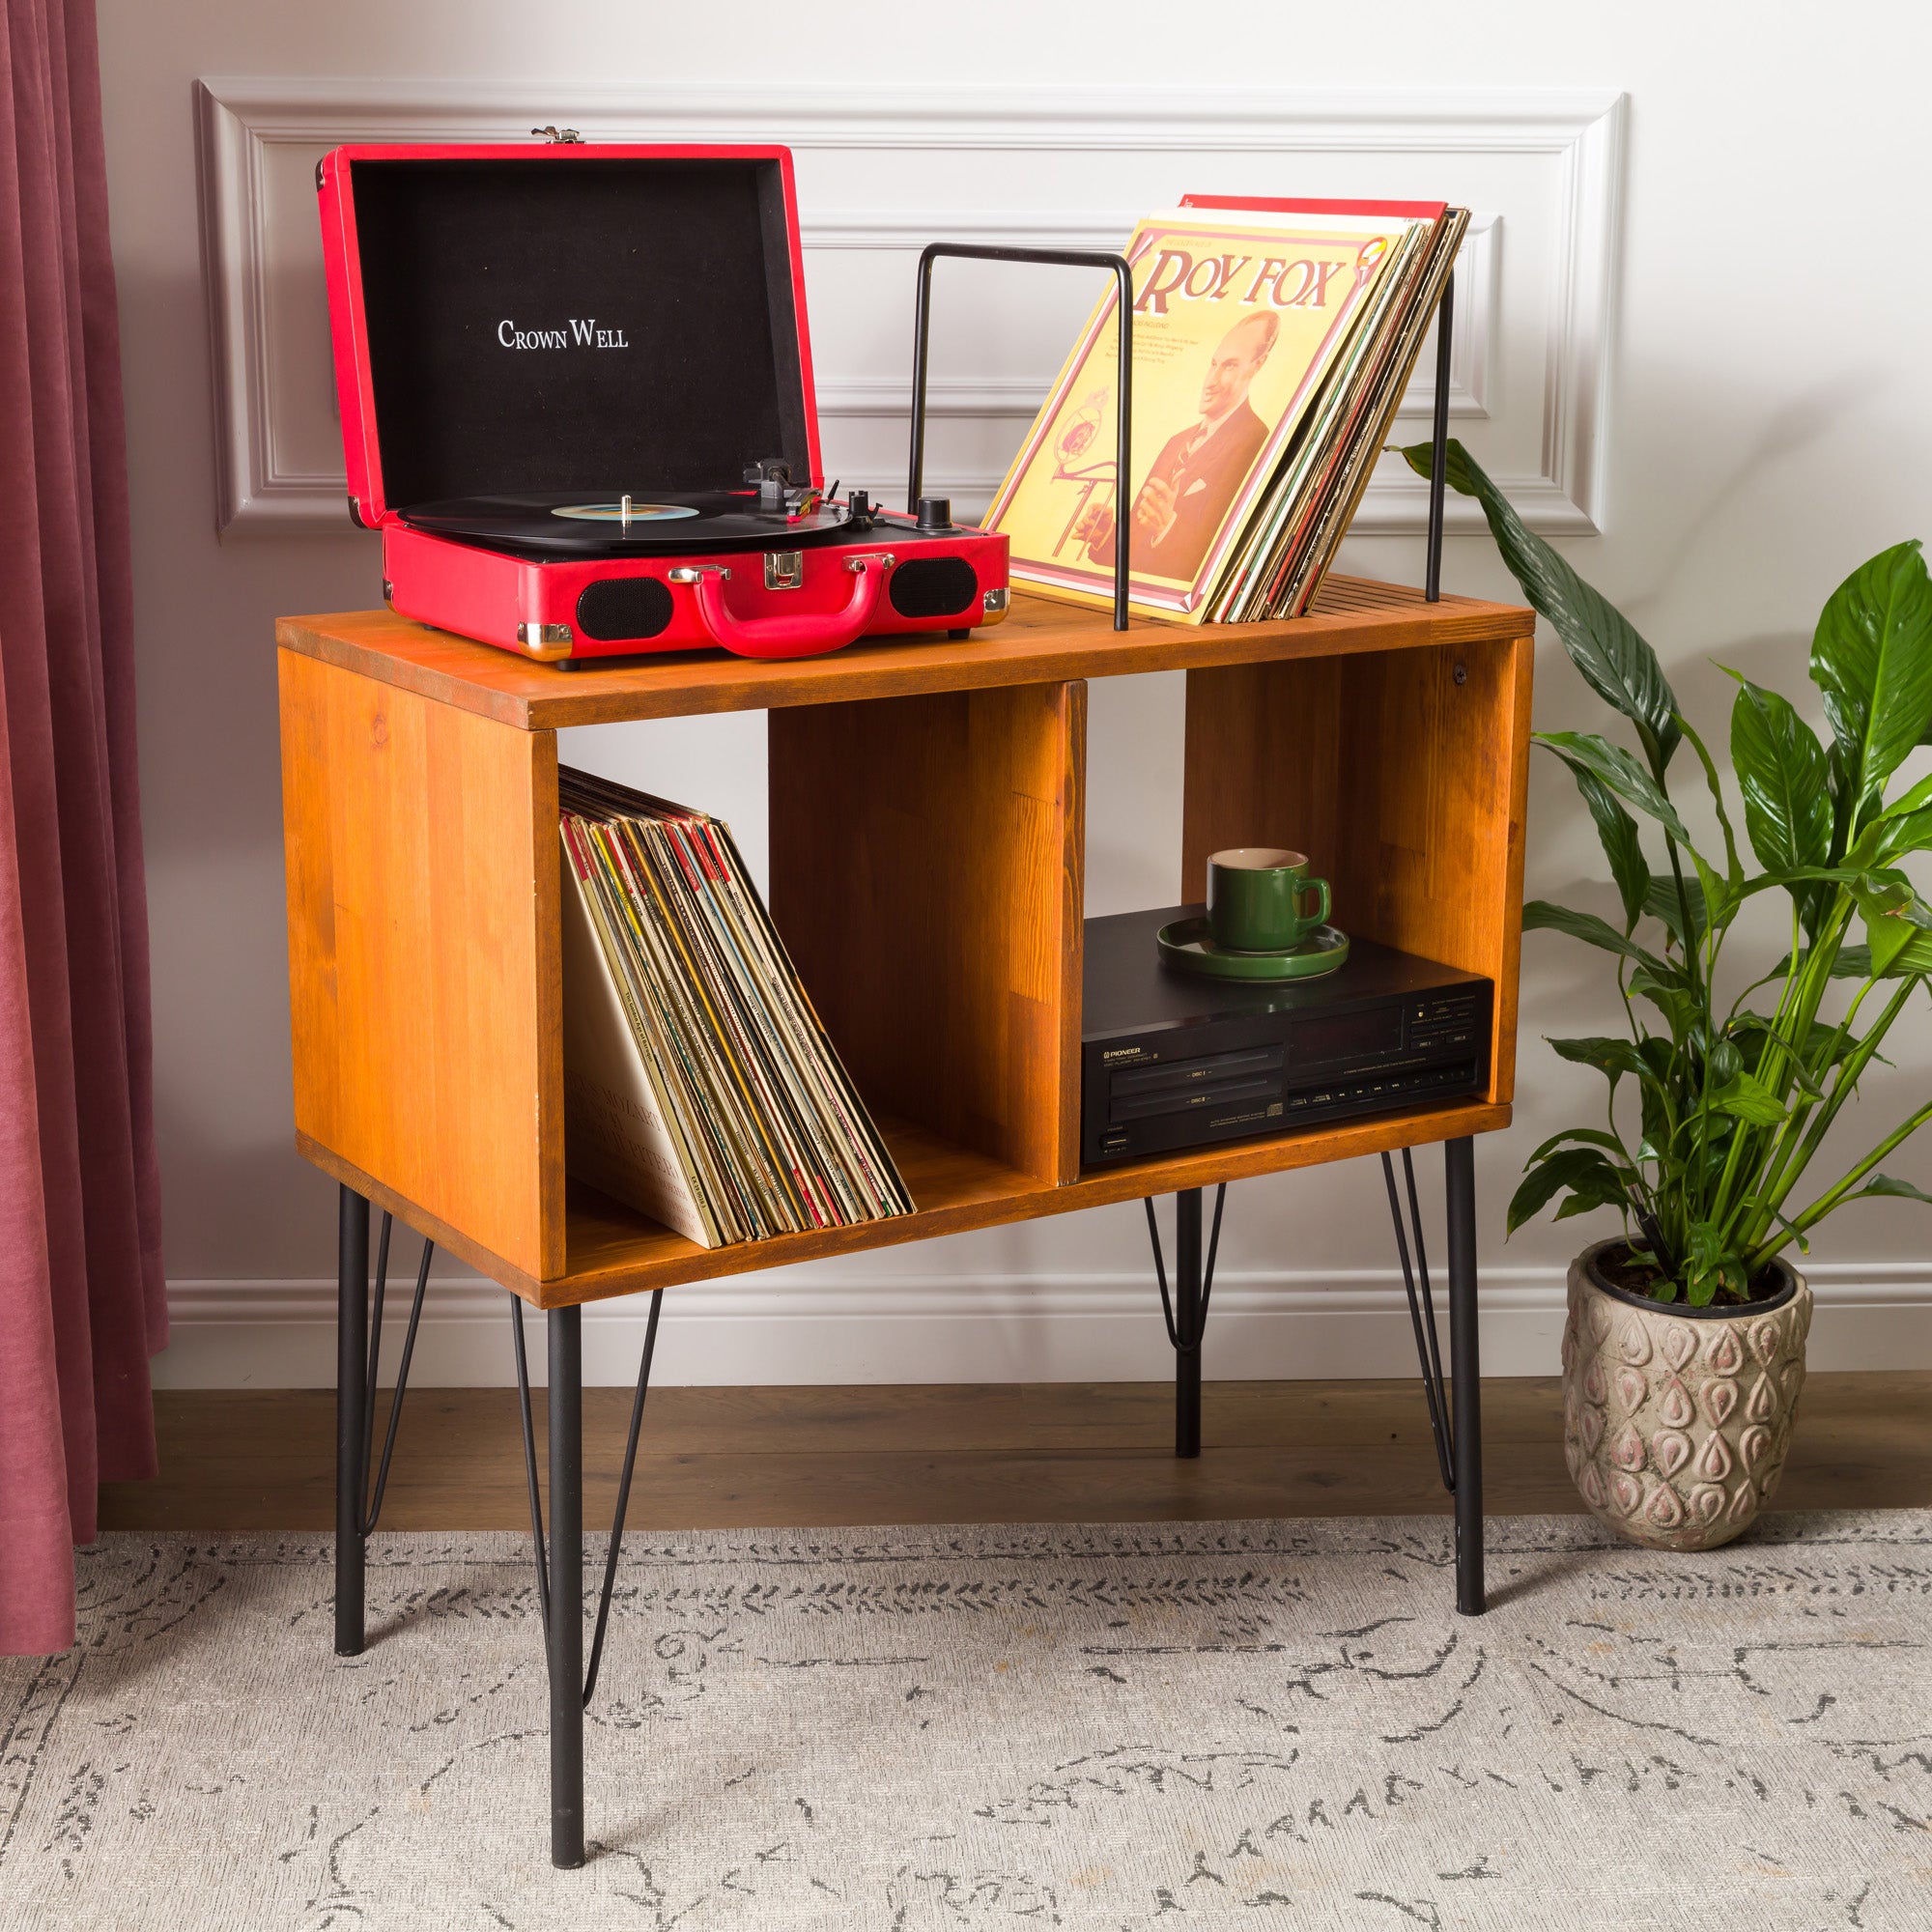 Florida - 2 Compartments Record Player Stand - Turntable Station With Storage - Large Vinyl Record Storage - Handcrafted Record Display Stand